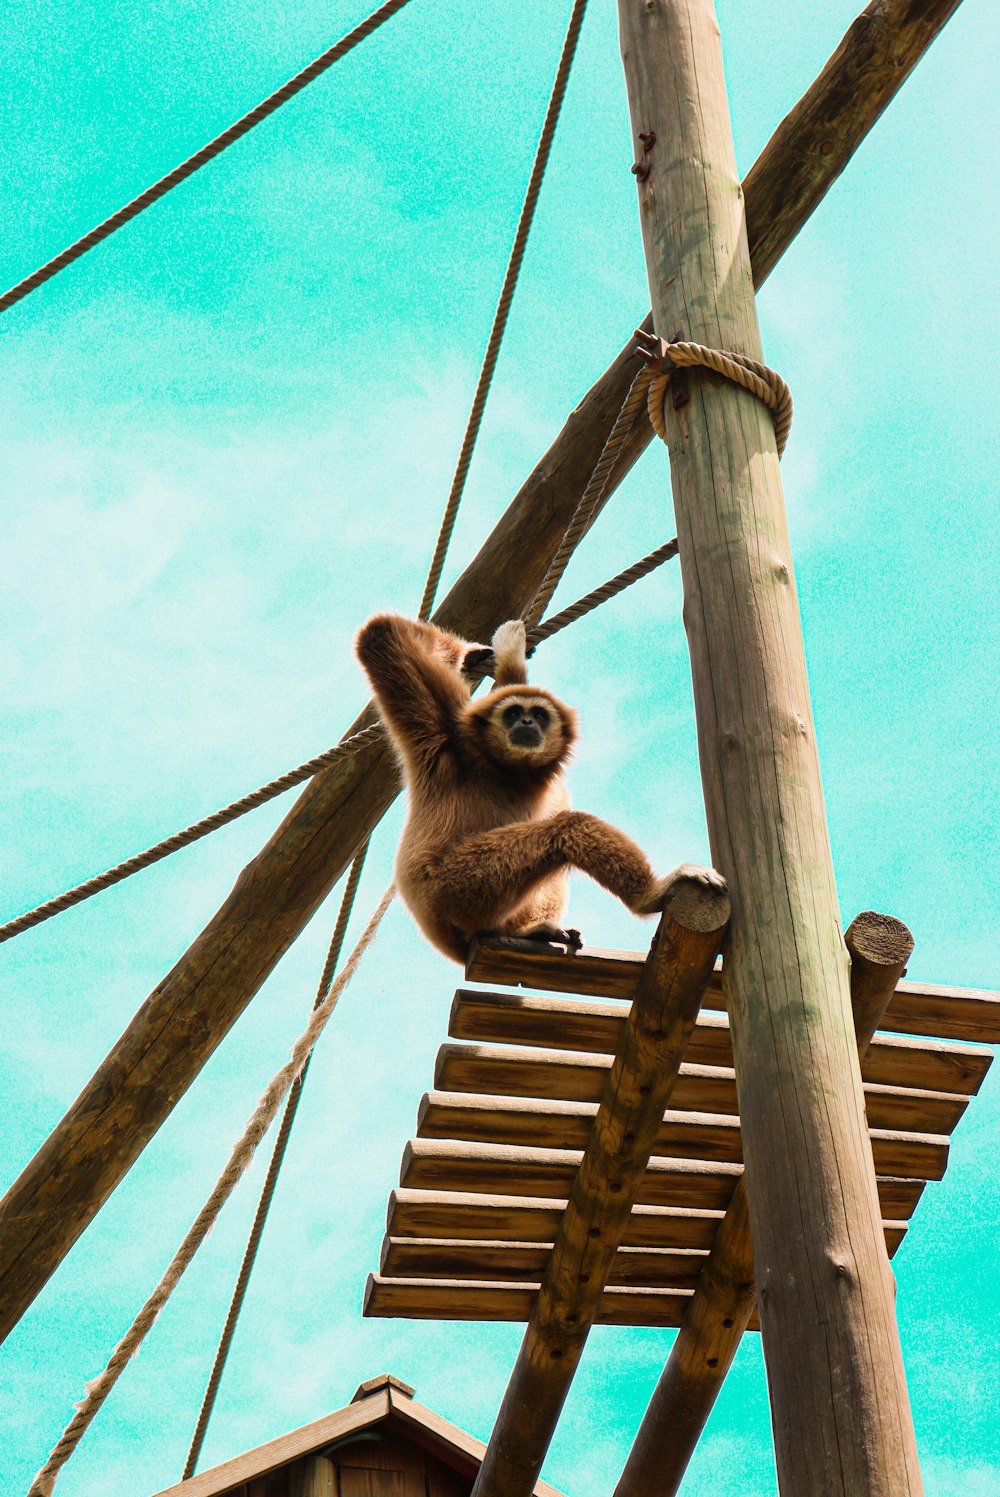 a monkey hanging on to a wooden structure